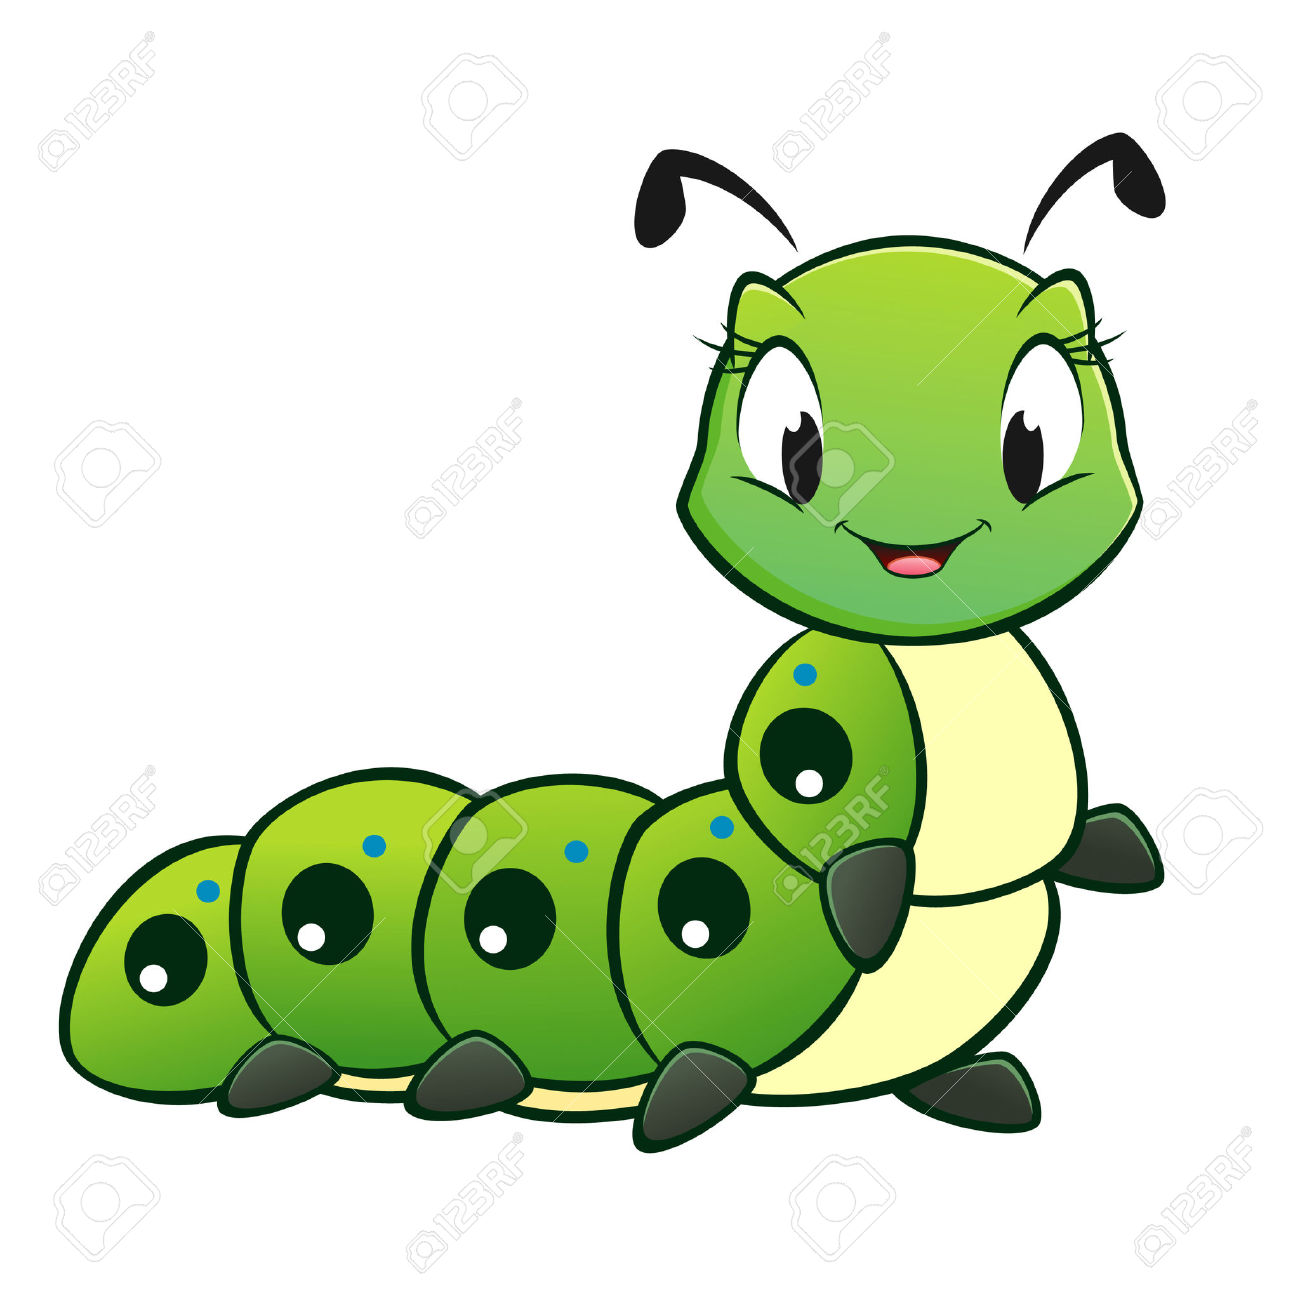 Adorable pencil and in. Caterpillar clipart illustration